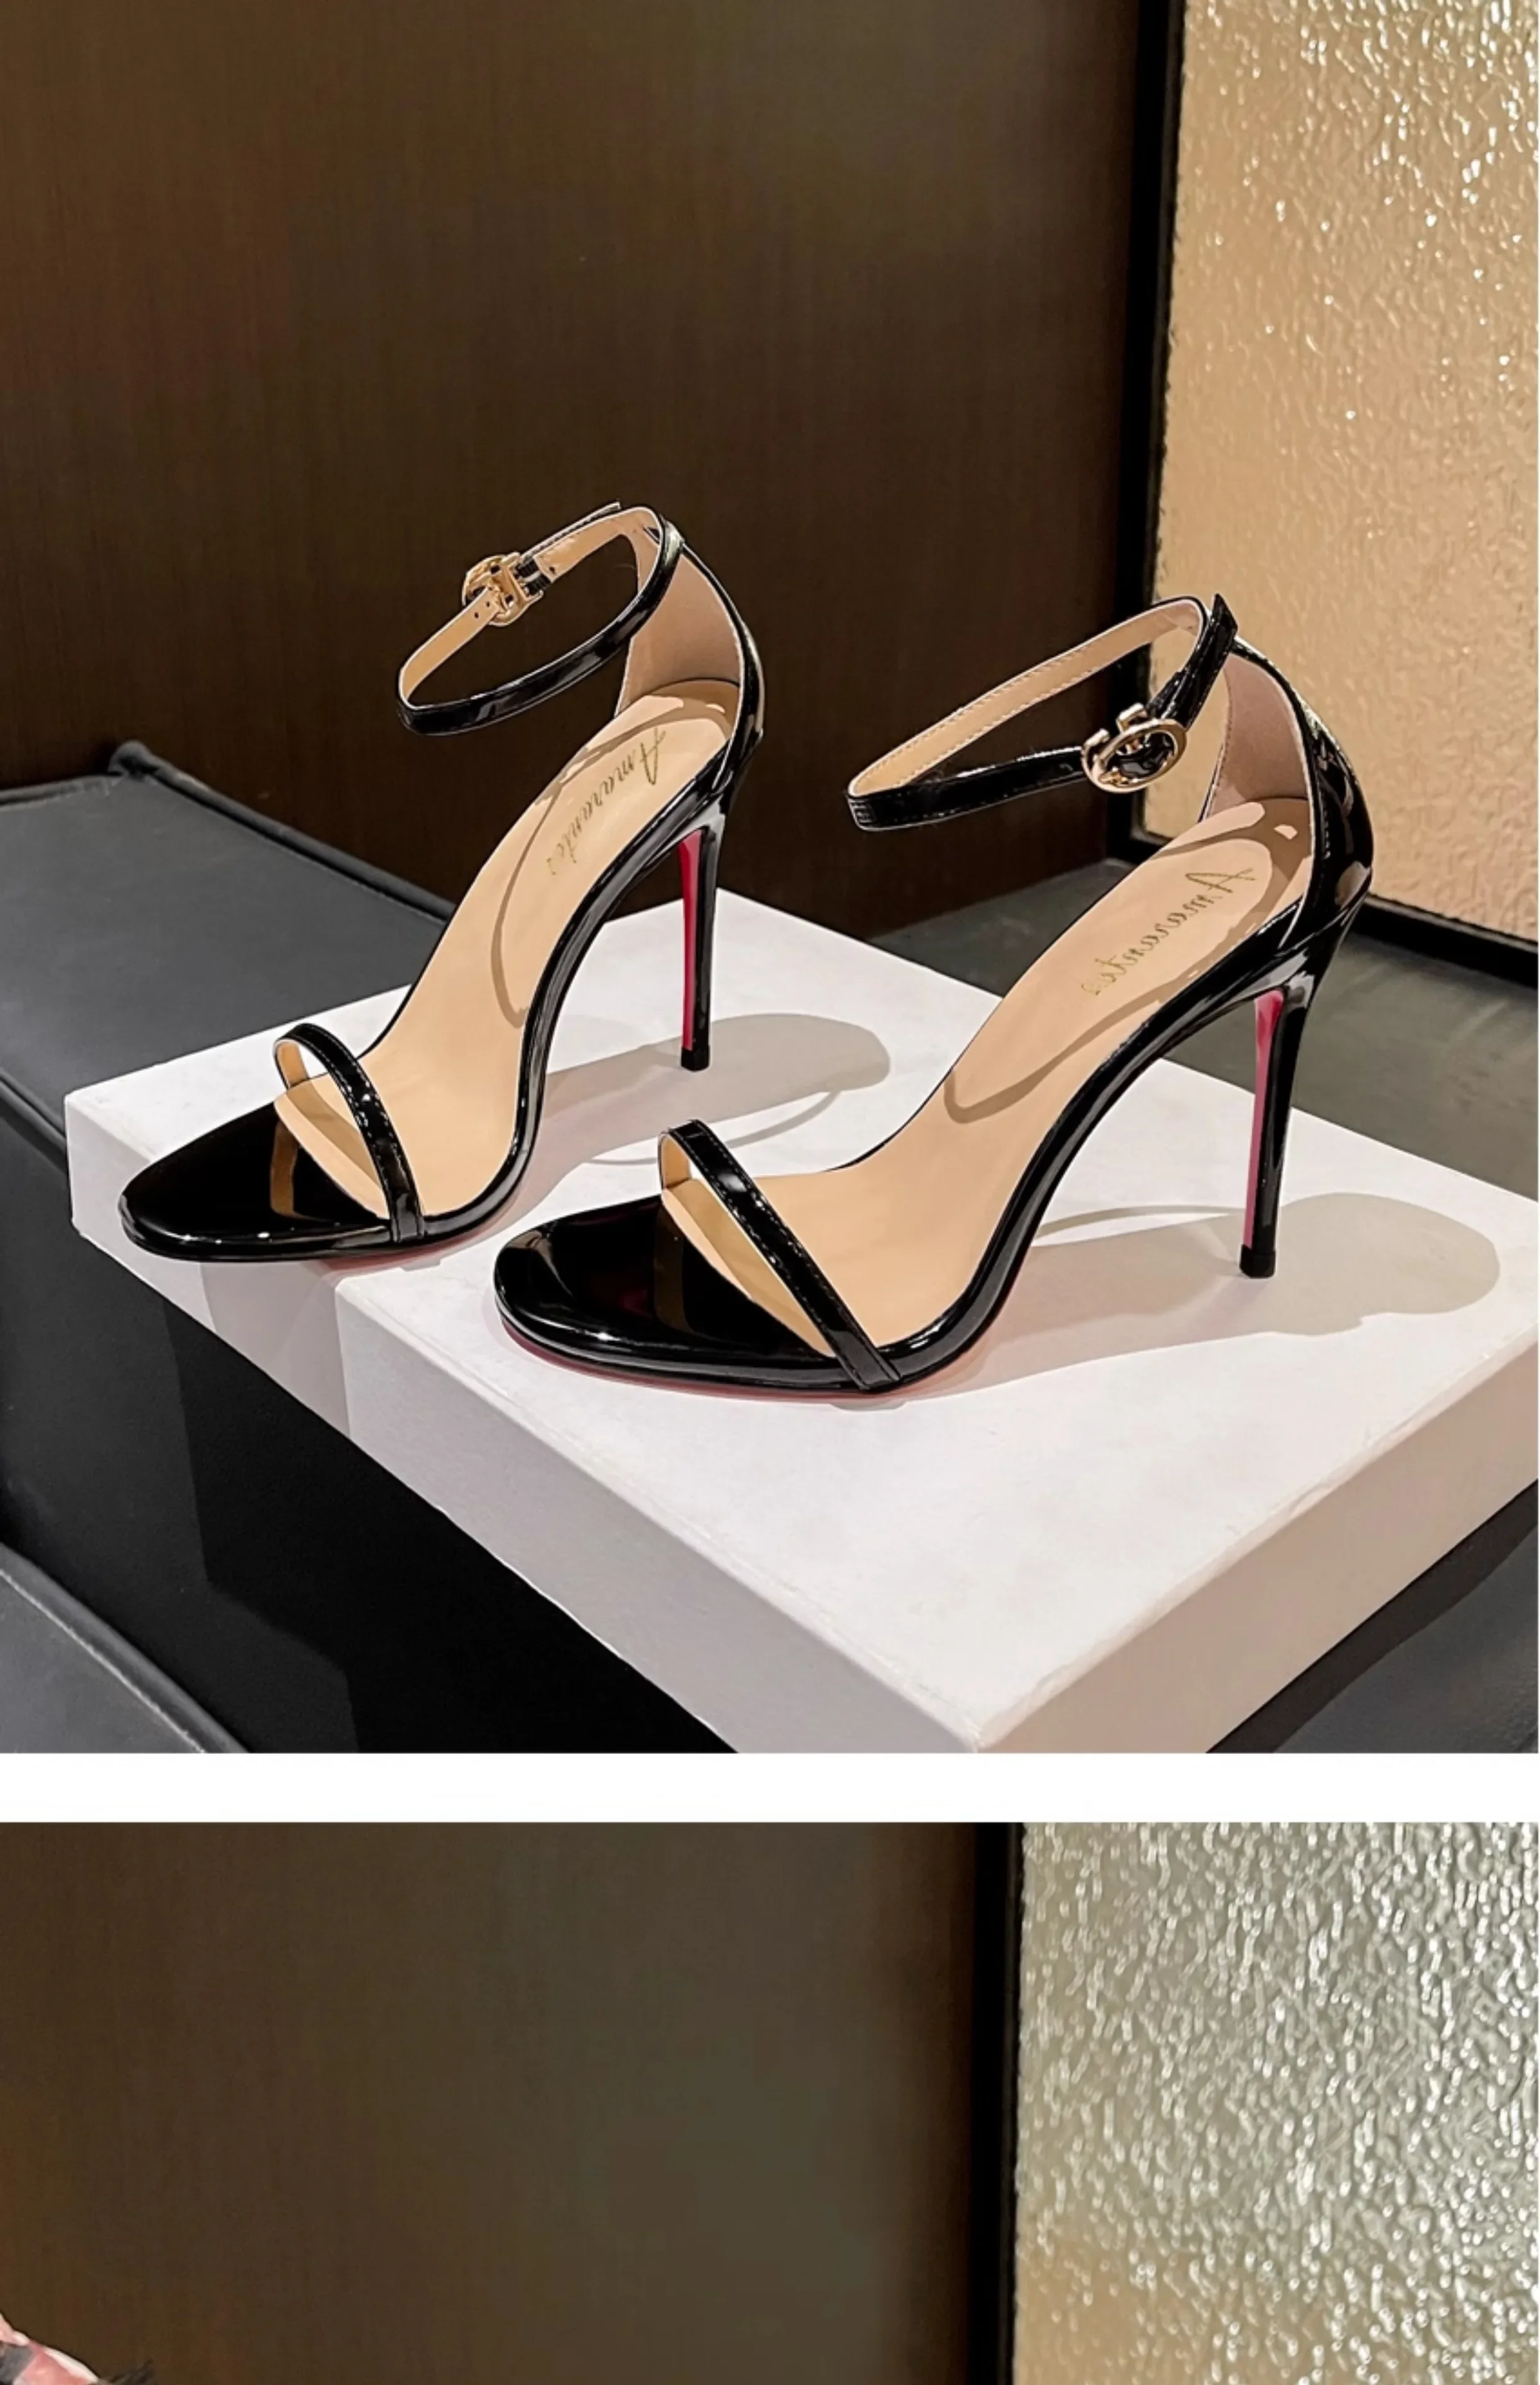 

Black striped sandals, women's summer new style, red soled high heels, slim heels, sexy internet famous plus size women's shoes